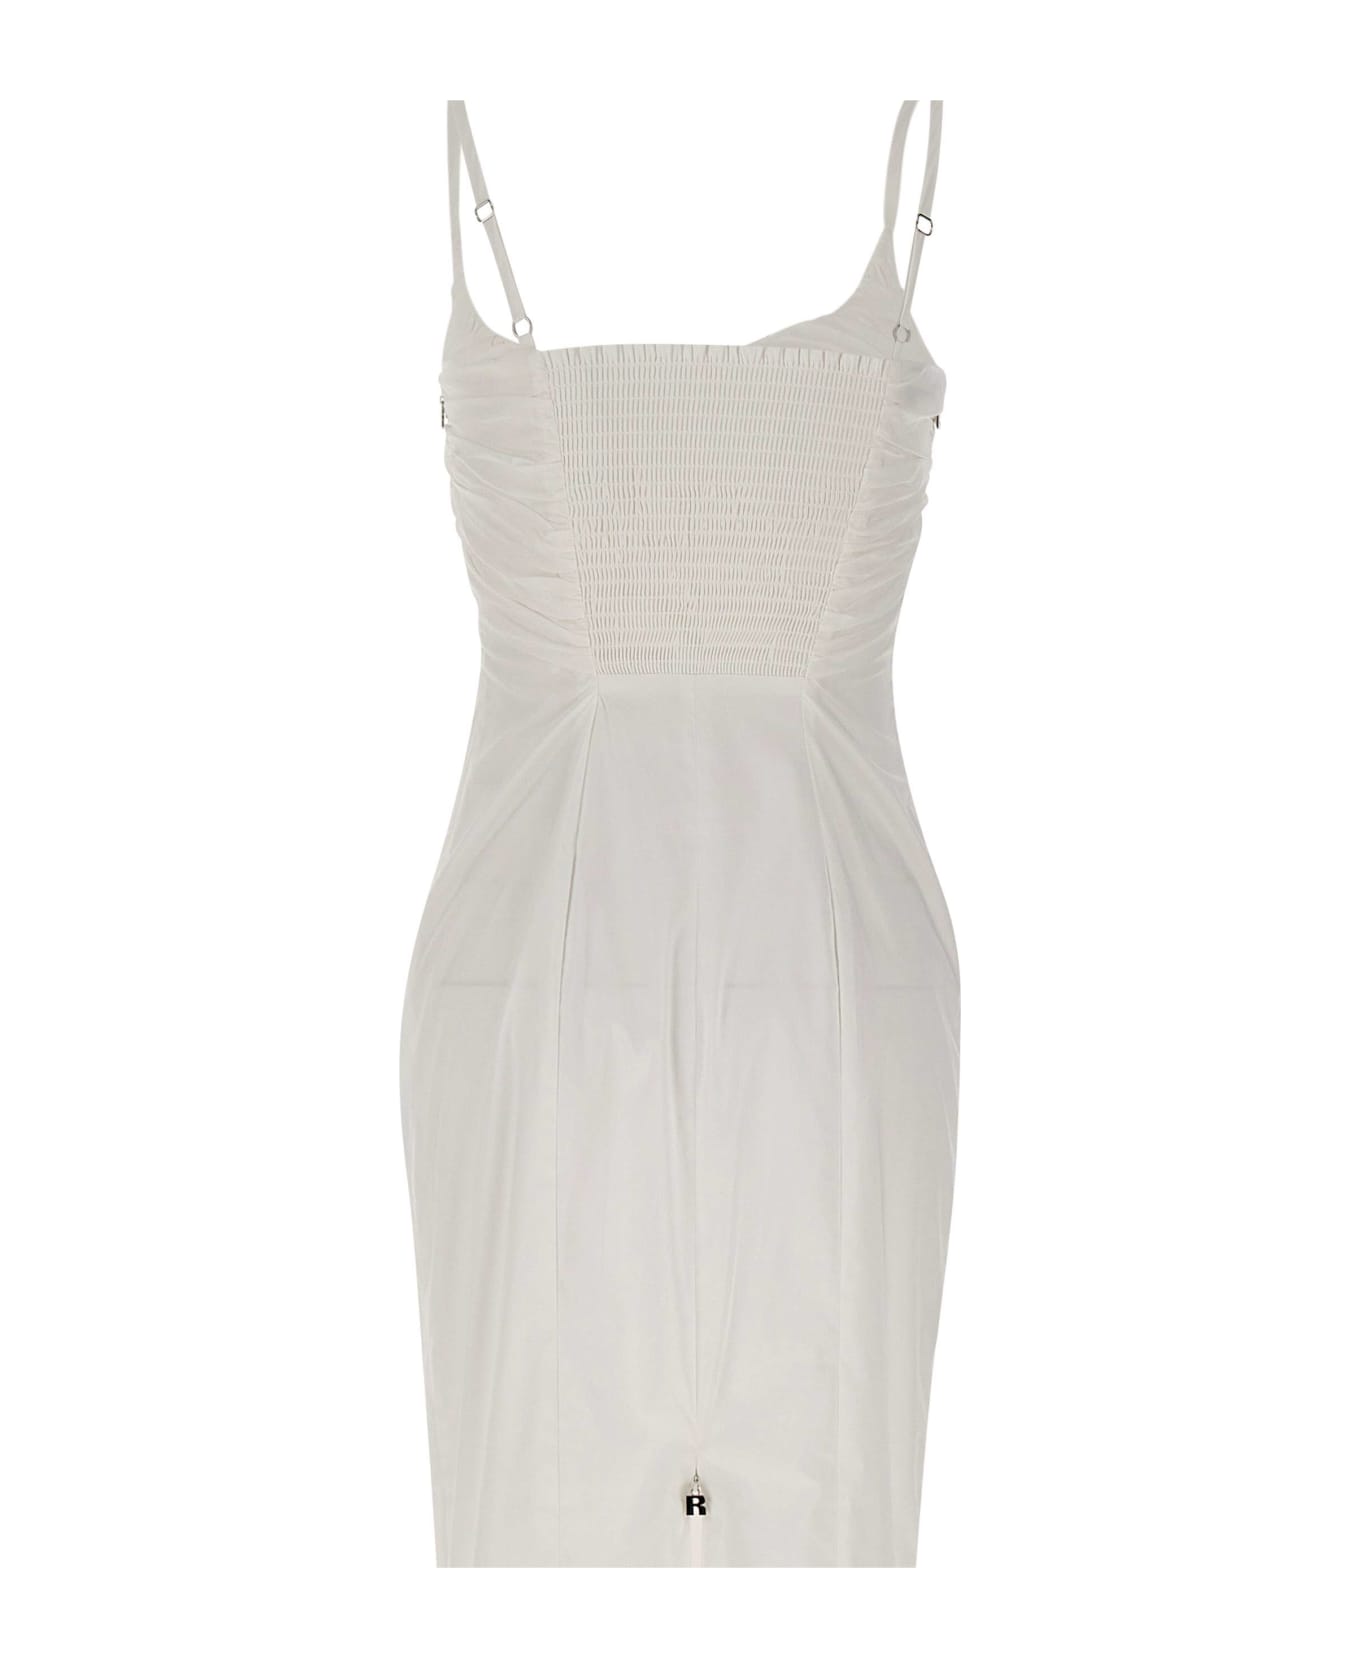 Rotate by Birger Christensen "ruched Cup Midi Dress" Cotton Dress - WHITE